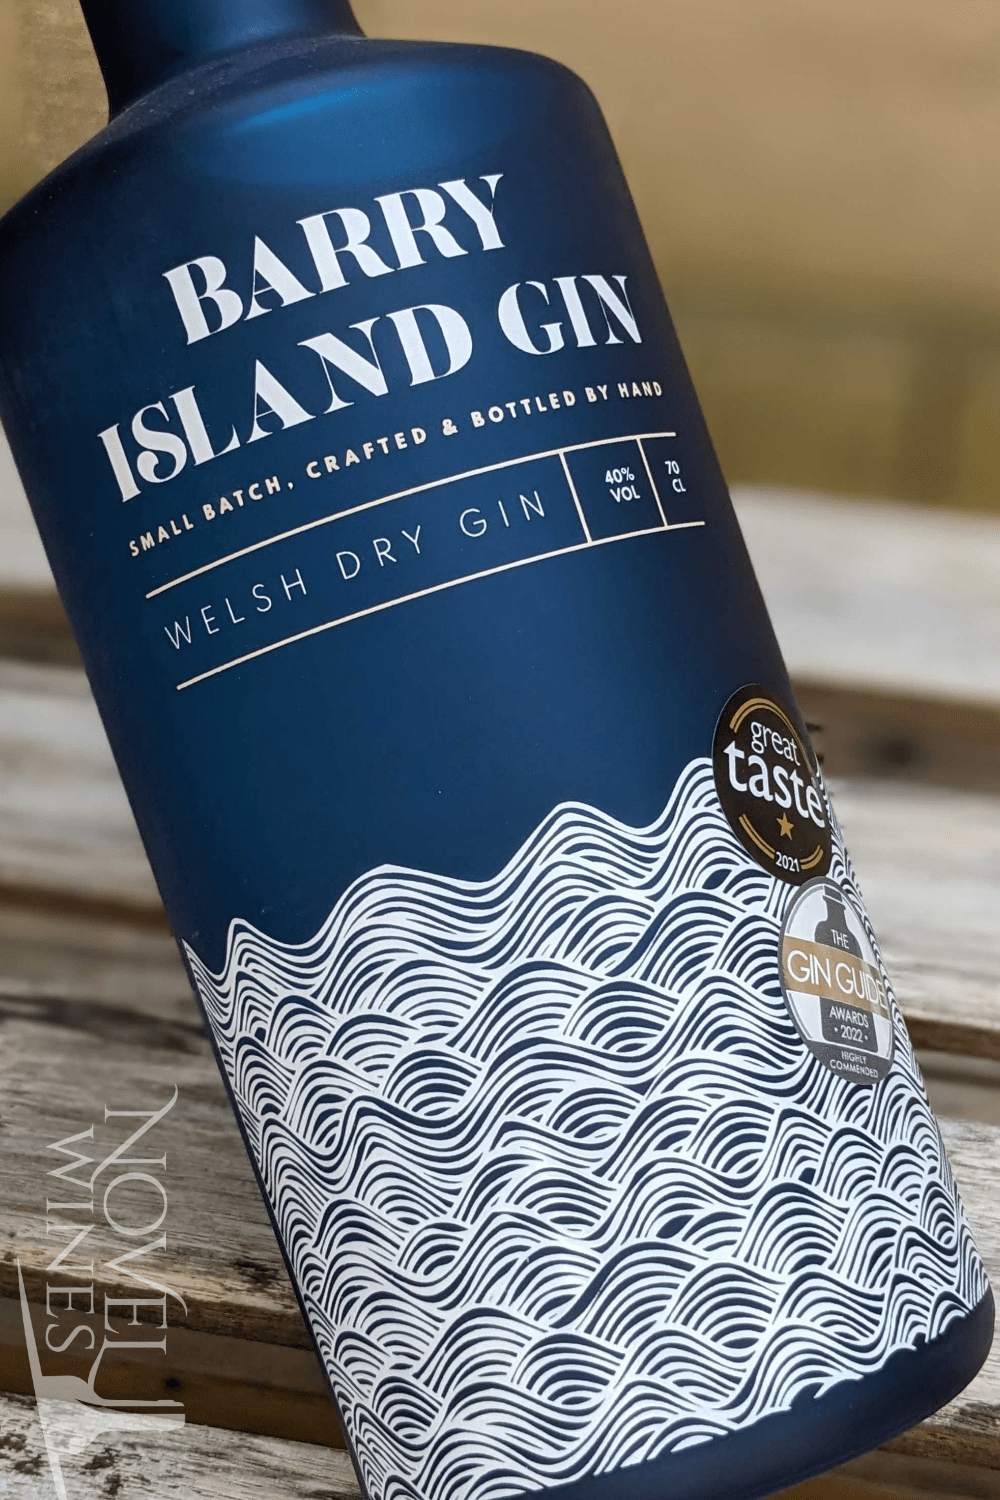 Barry Island Spirits Co. Gin Barry Island Welsh Dry Gin 40.0% abv, Wales